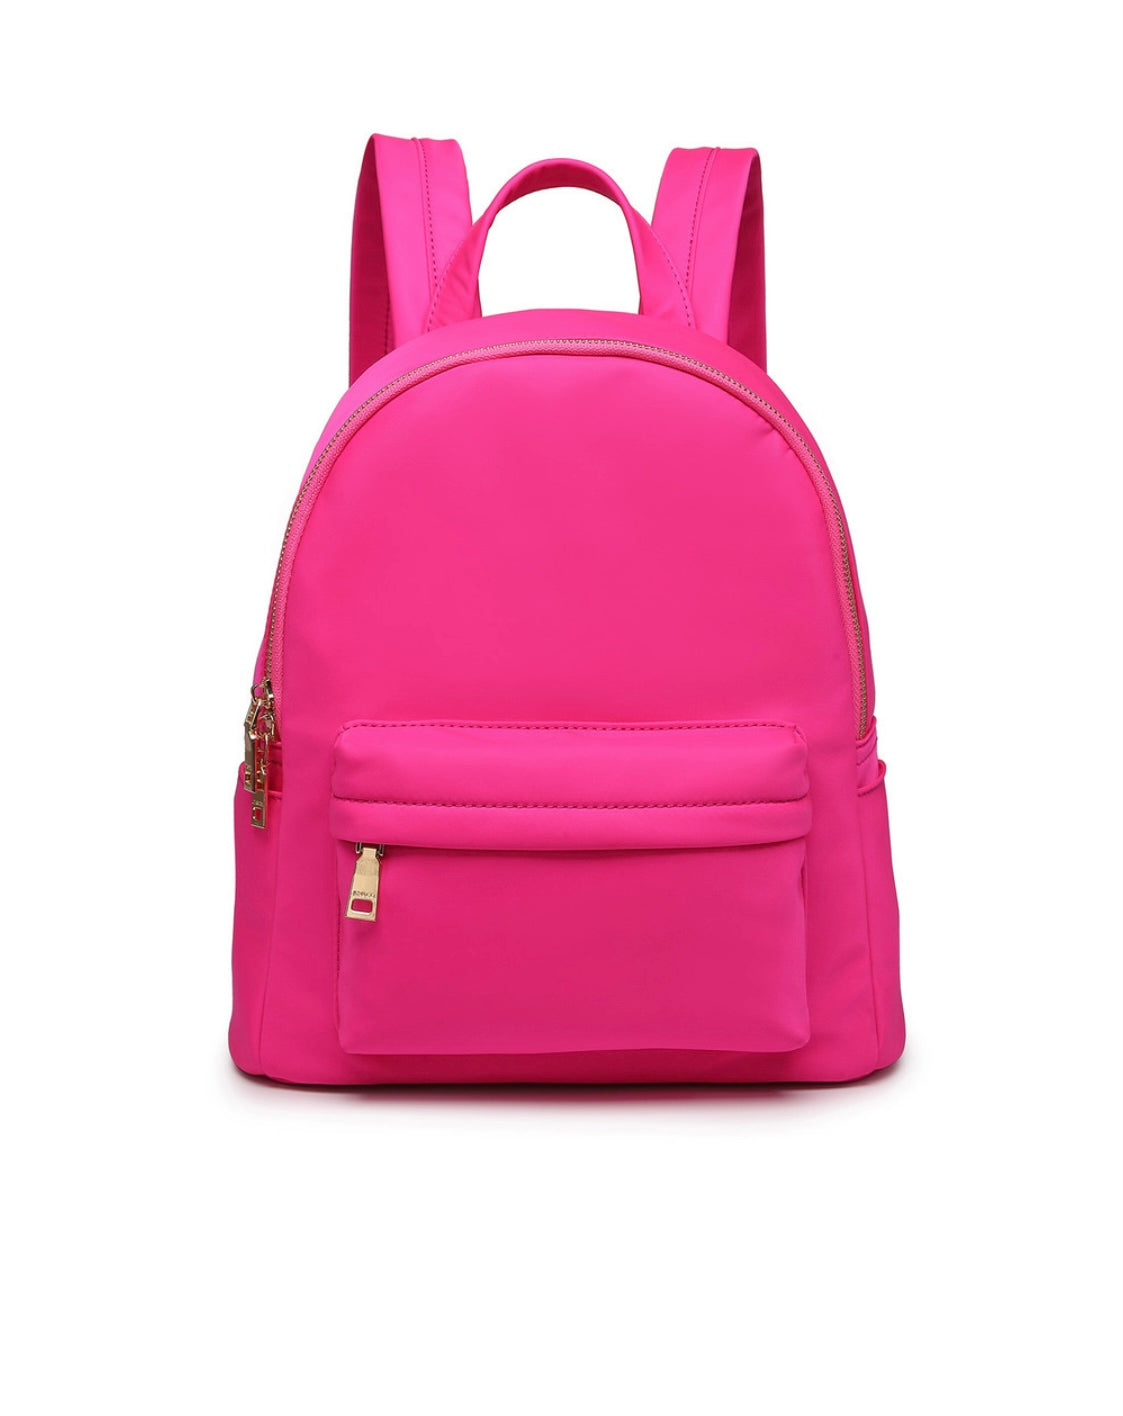 PHINA BACKPACK 2172